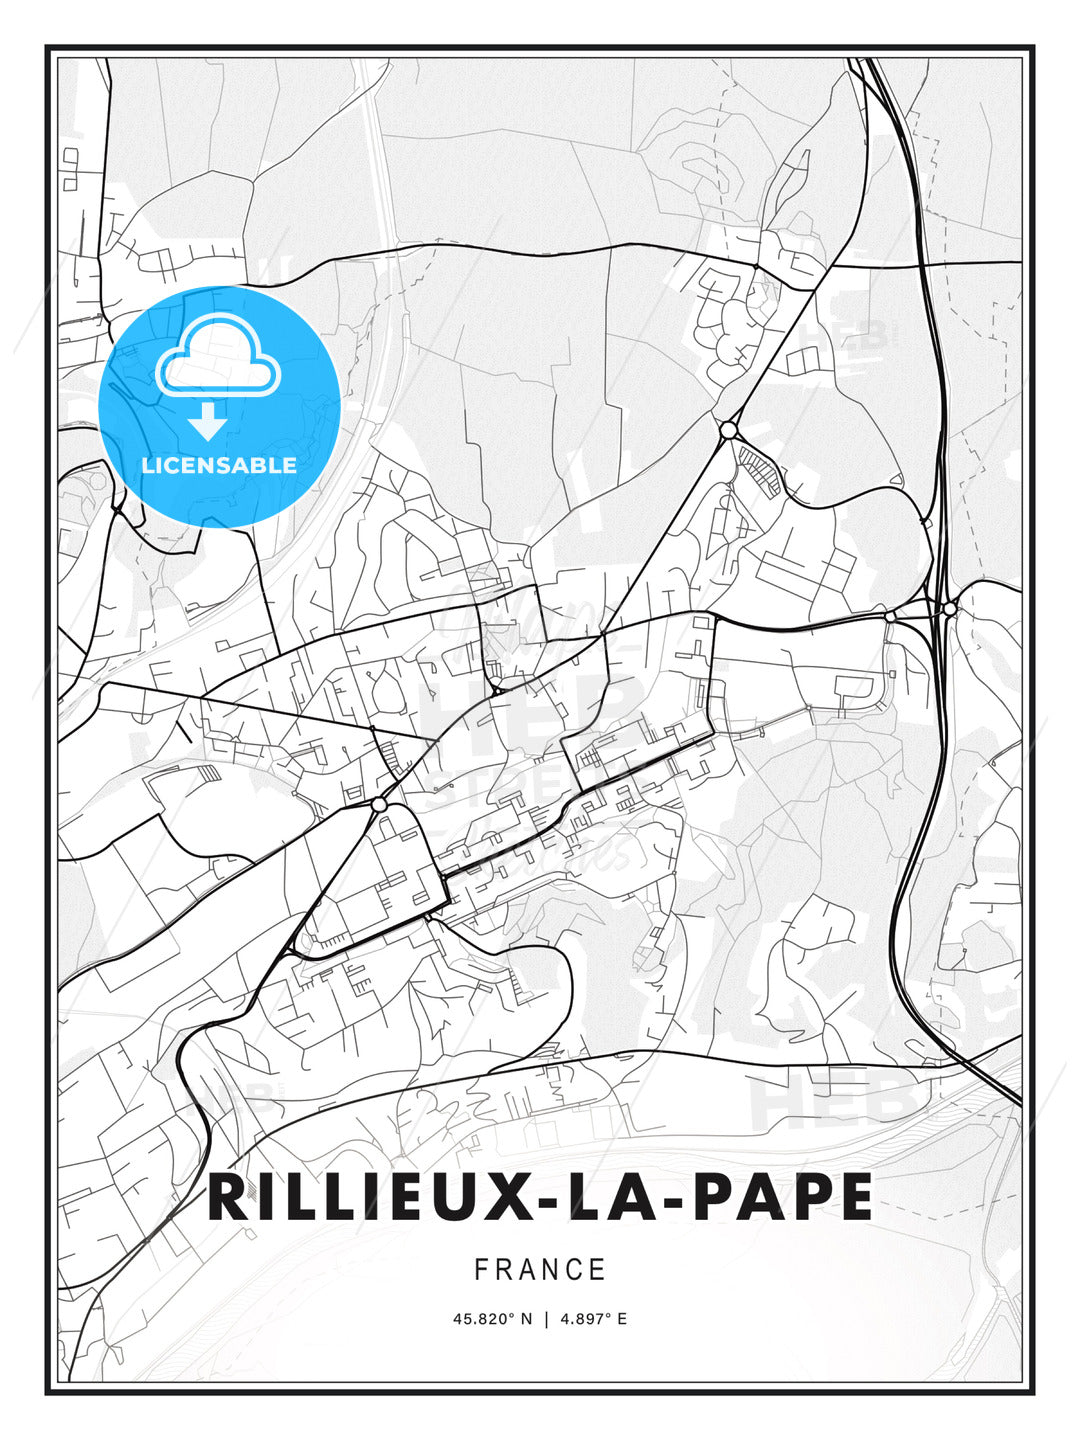 Rillieux-la-Pape, France, Modern Print Template in Various Formats - HEBSTREITS Sketches